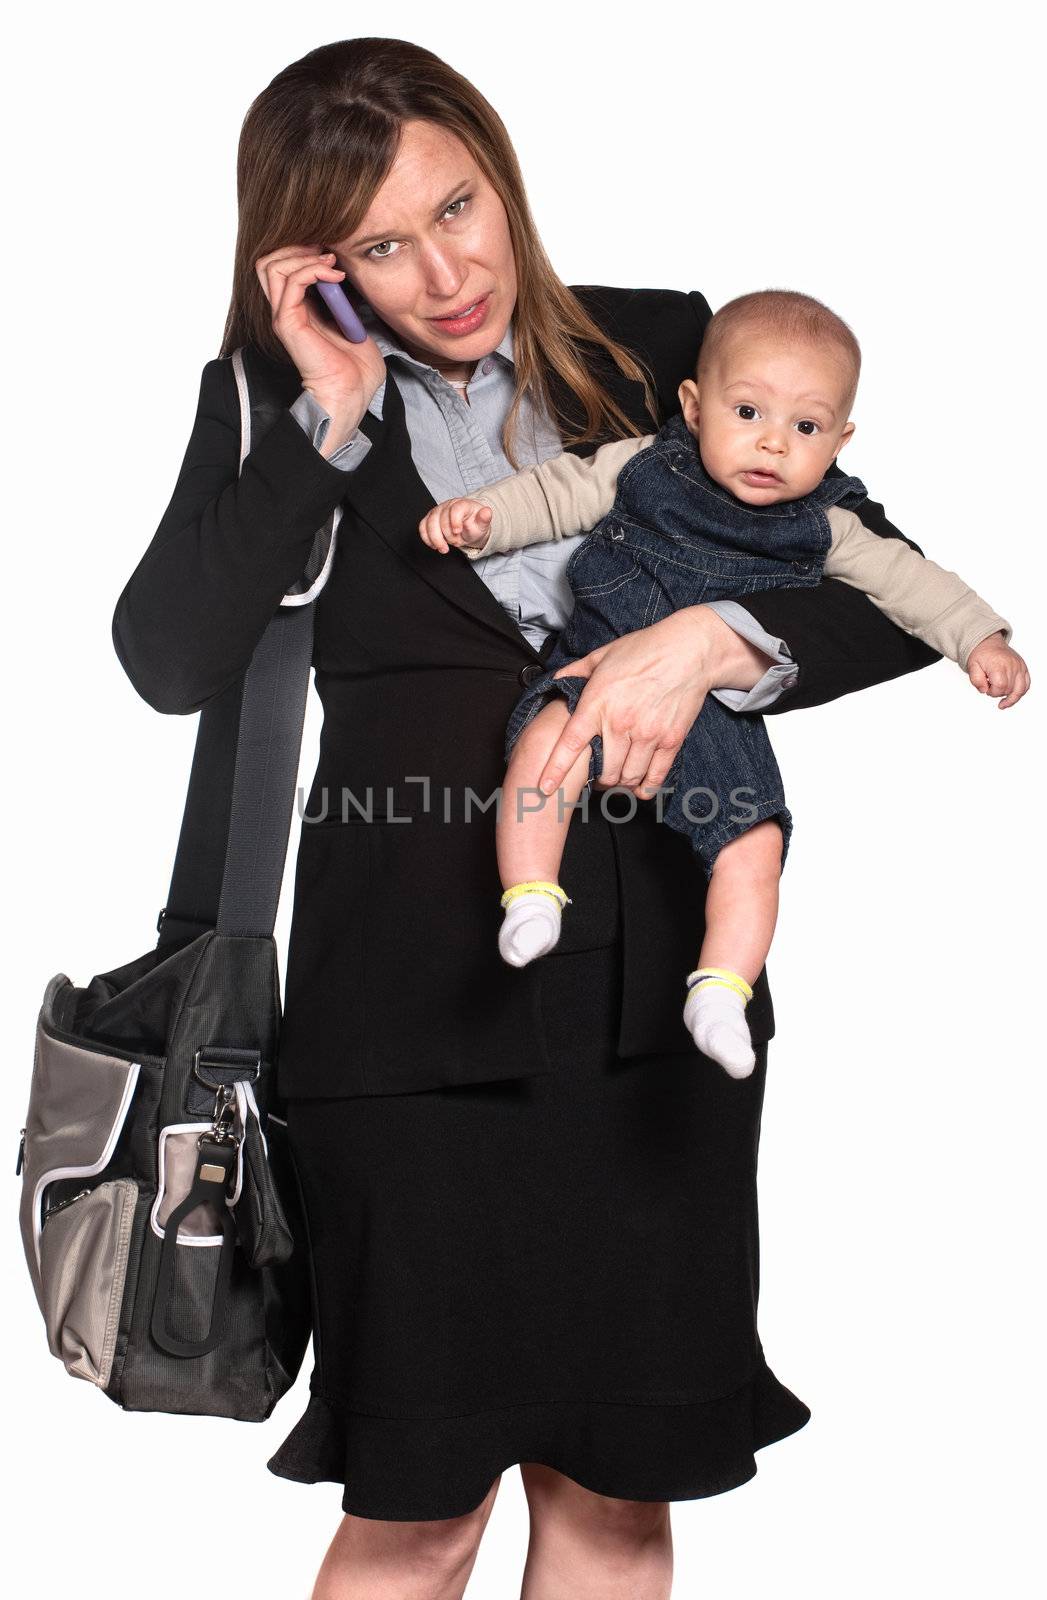 Busy Woman with Baby by Creatista